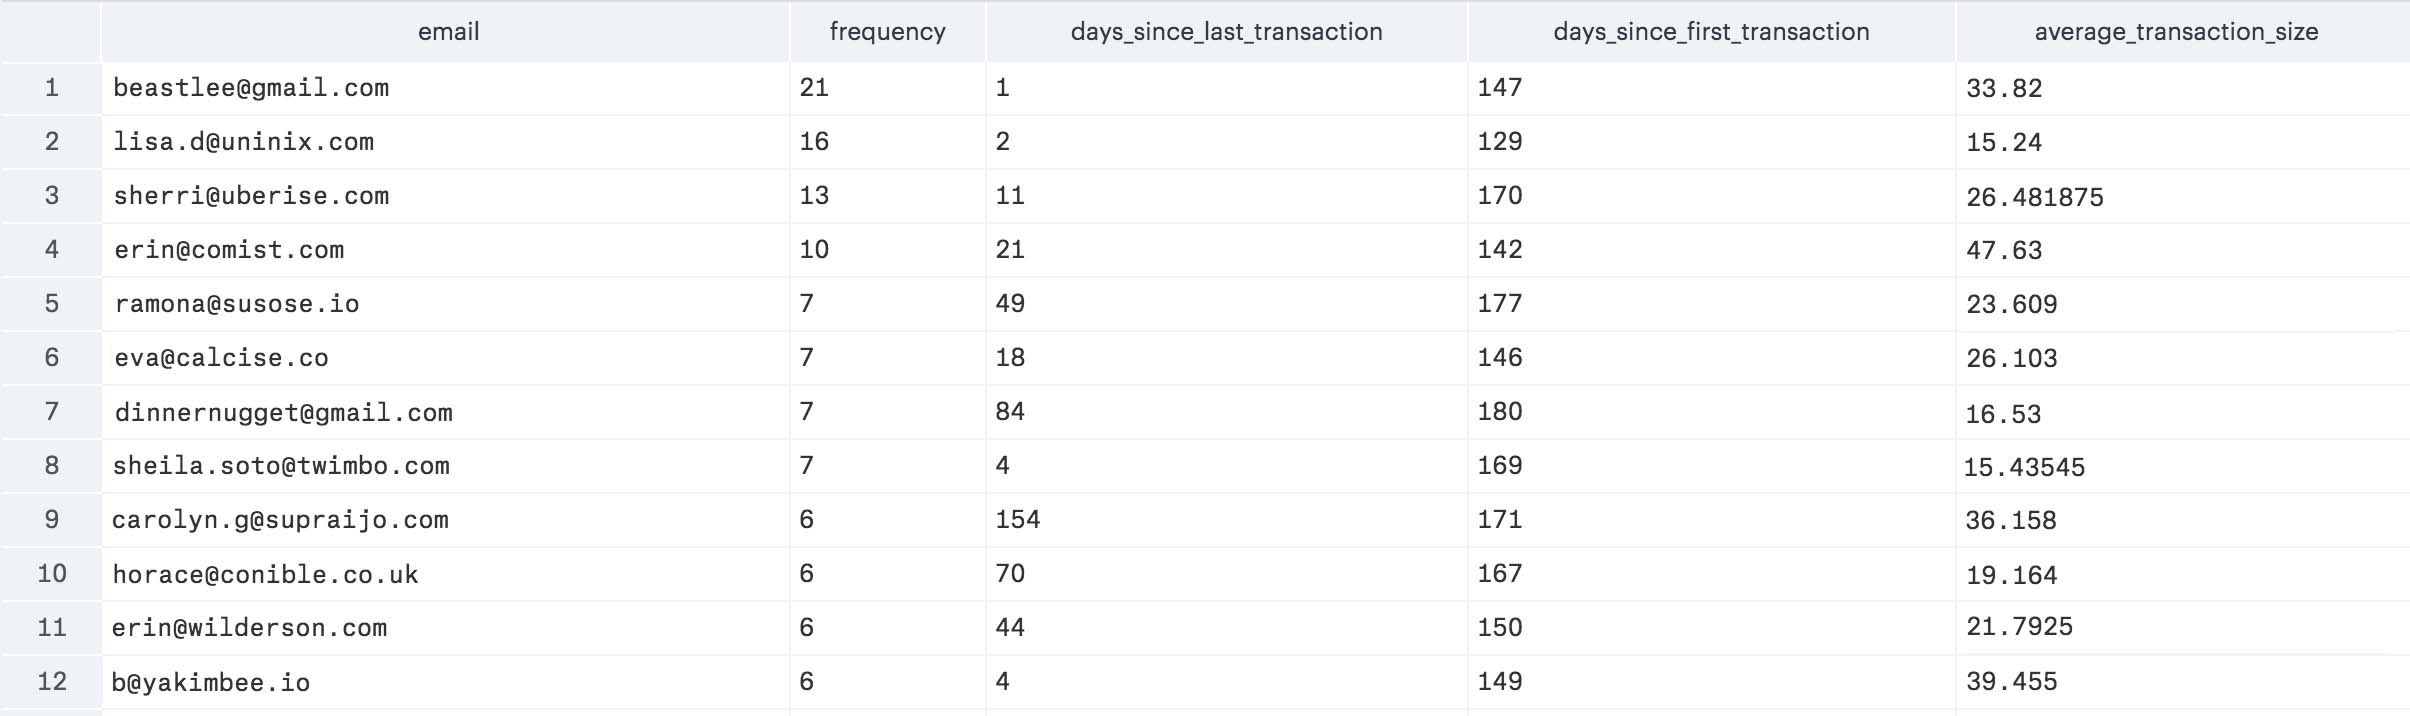 Screenshot of a spreadsheet with columms email, frequency, days_since_last_transaction, days_since_first_transaction, and average_transaction_size.